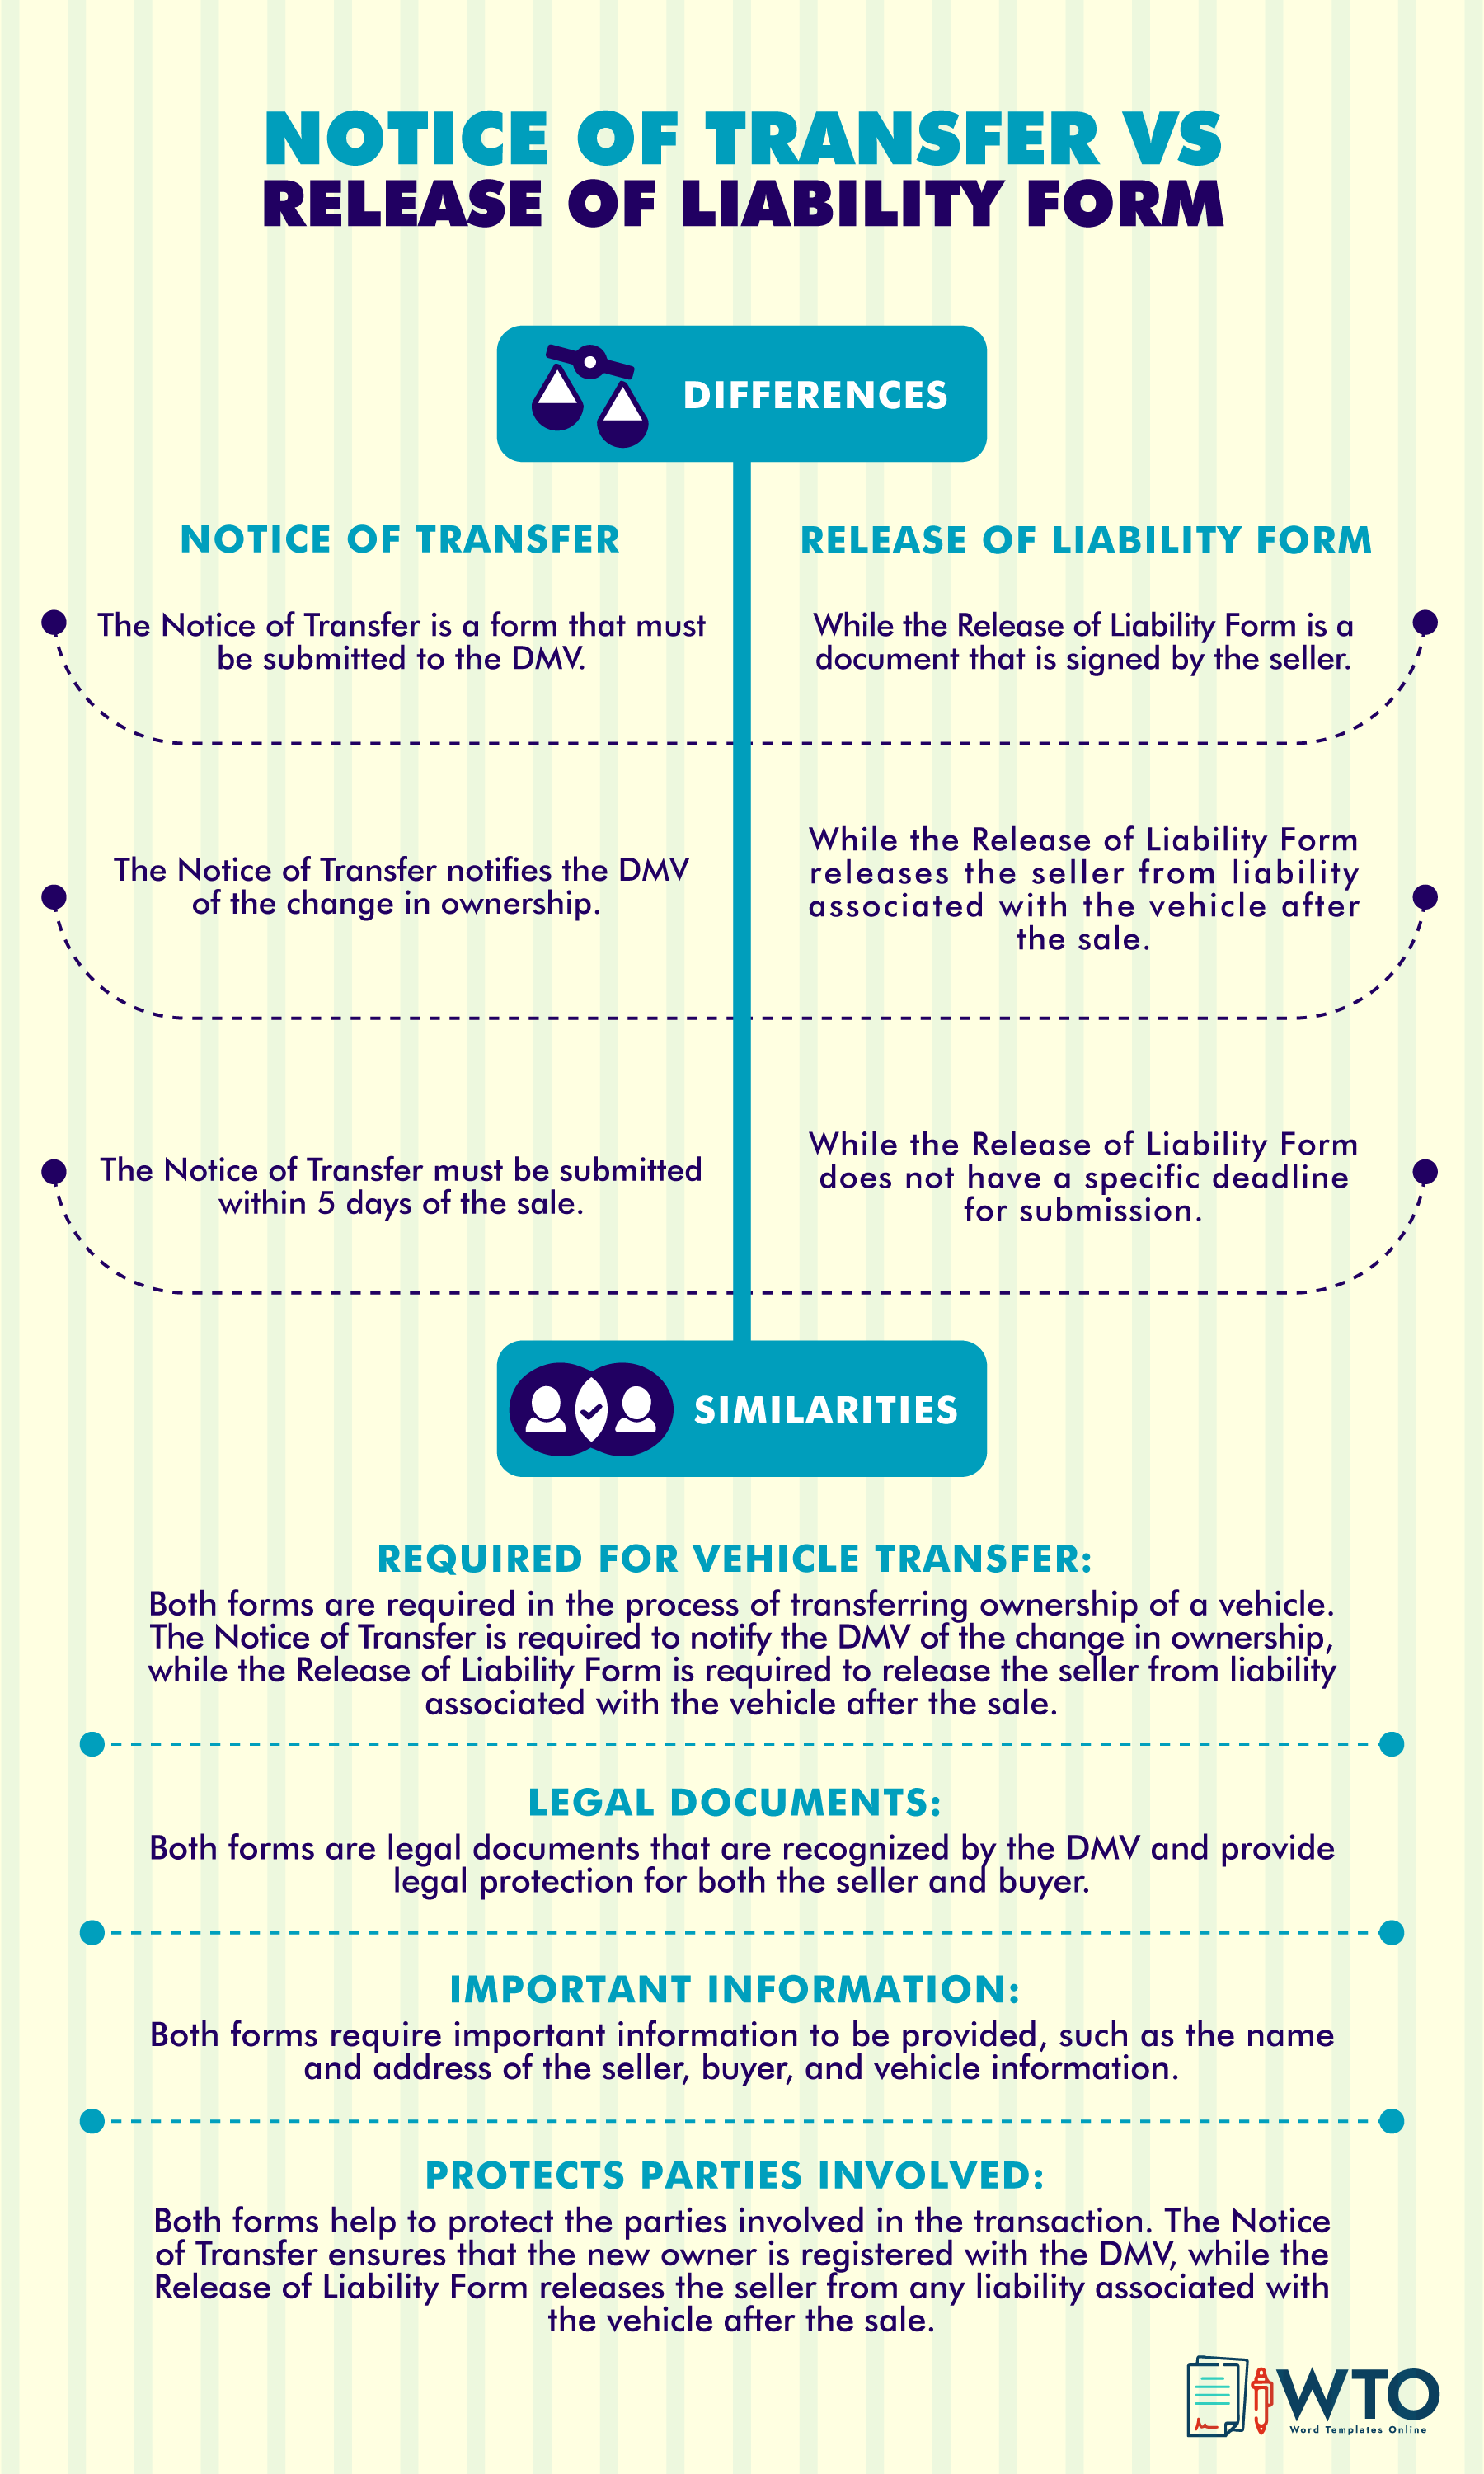 This infographic is about Notice of Transfer vs Release of Liability form.